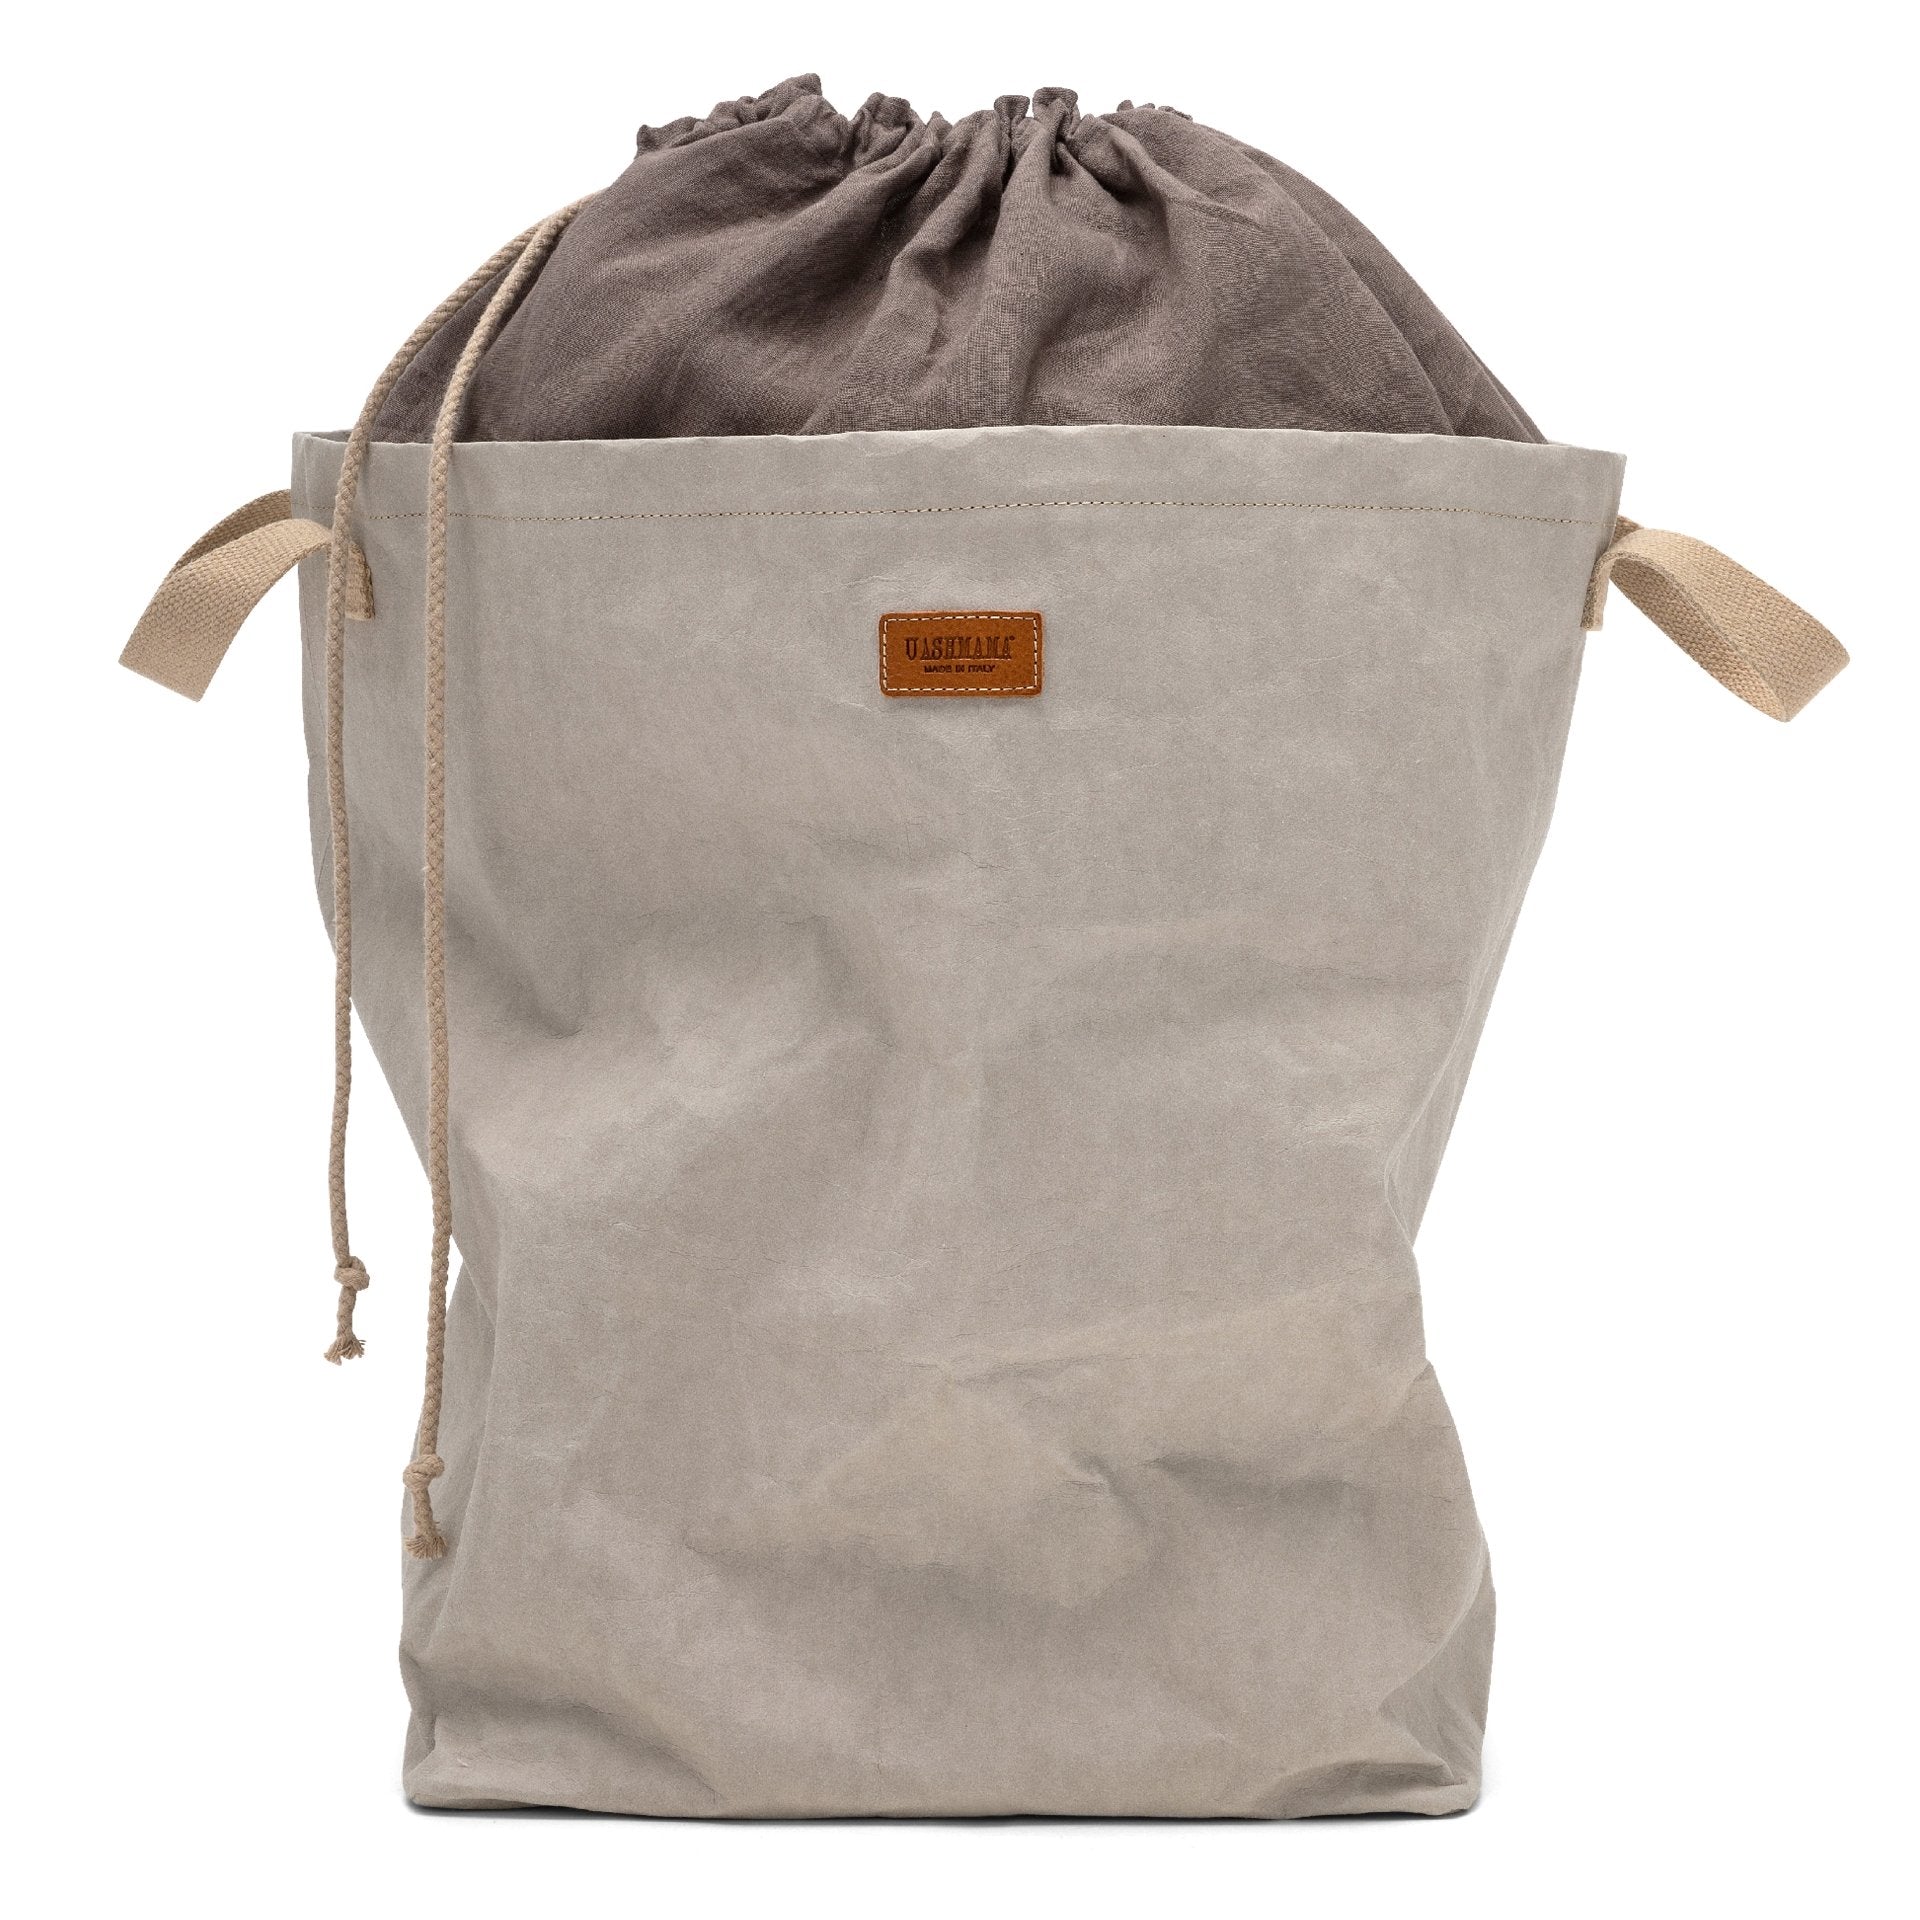 A washable paper laundry bag with a drawstring linen top is shown. The bag has two small recycled cotton handles on either side at the top of the bag, and one drawstring closure at the top. A small leather UASHMAMA logo leather label is on the front of the bag. The bag is pale grey in colour with a dark grey linen top.